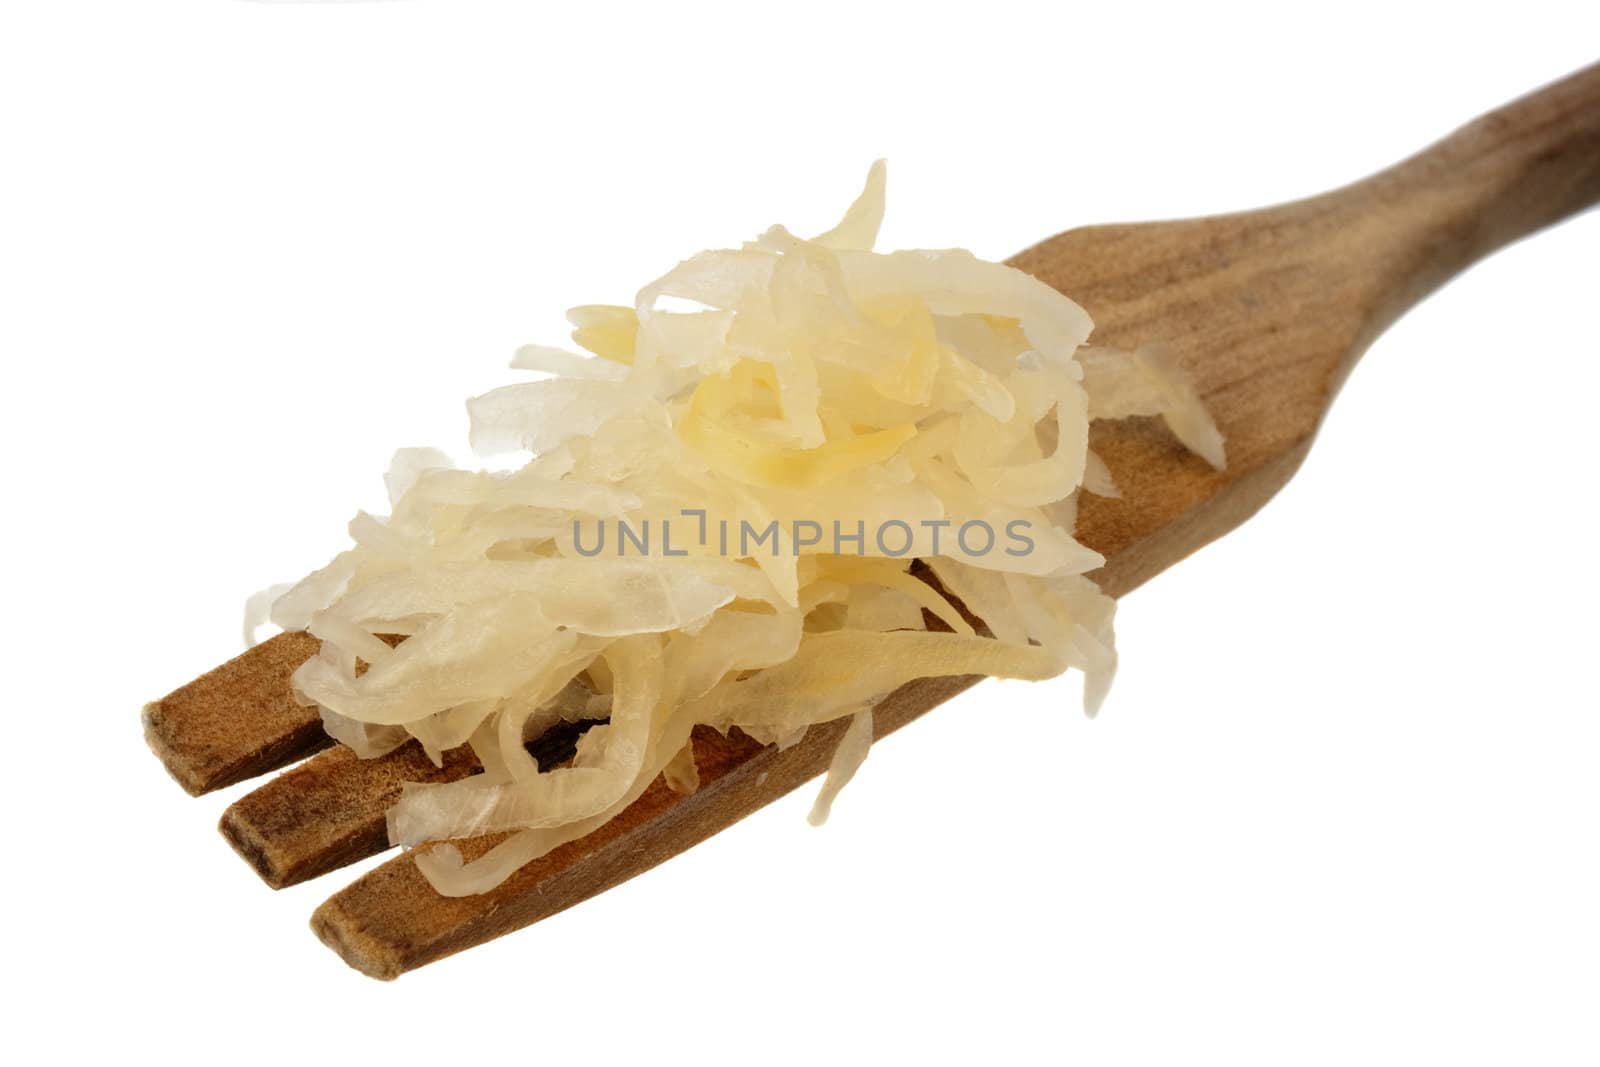 sauerkraut (fermented cabbage) on a wooden fork isolated on white